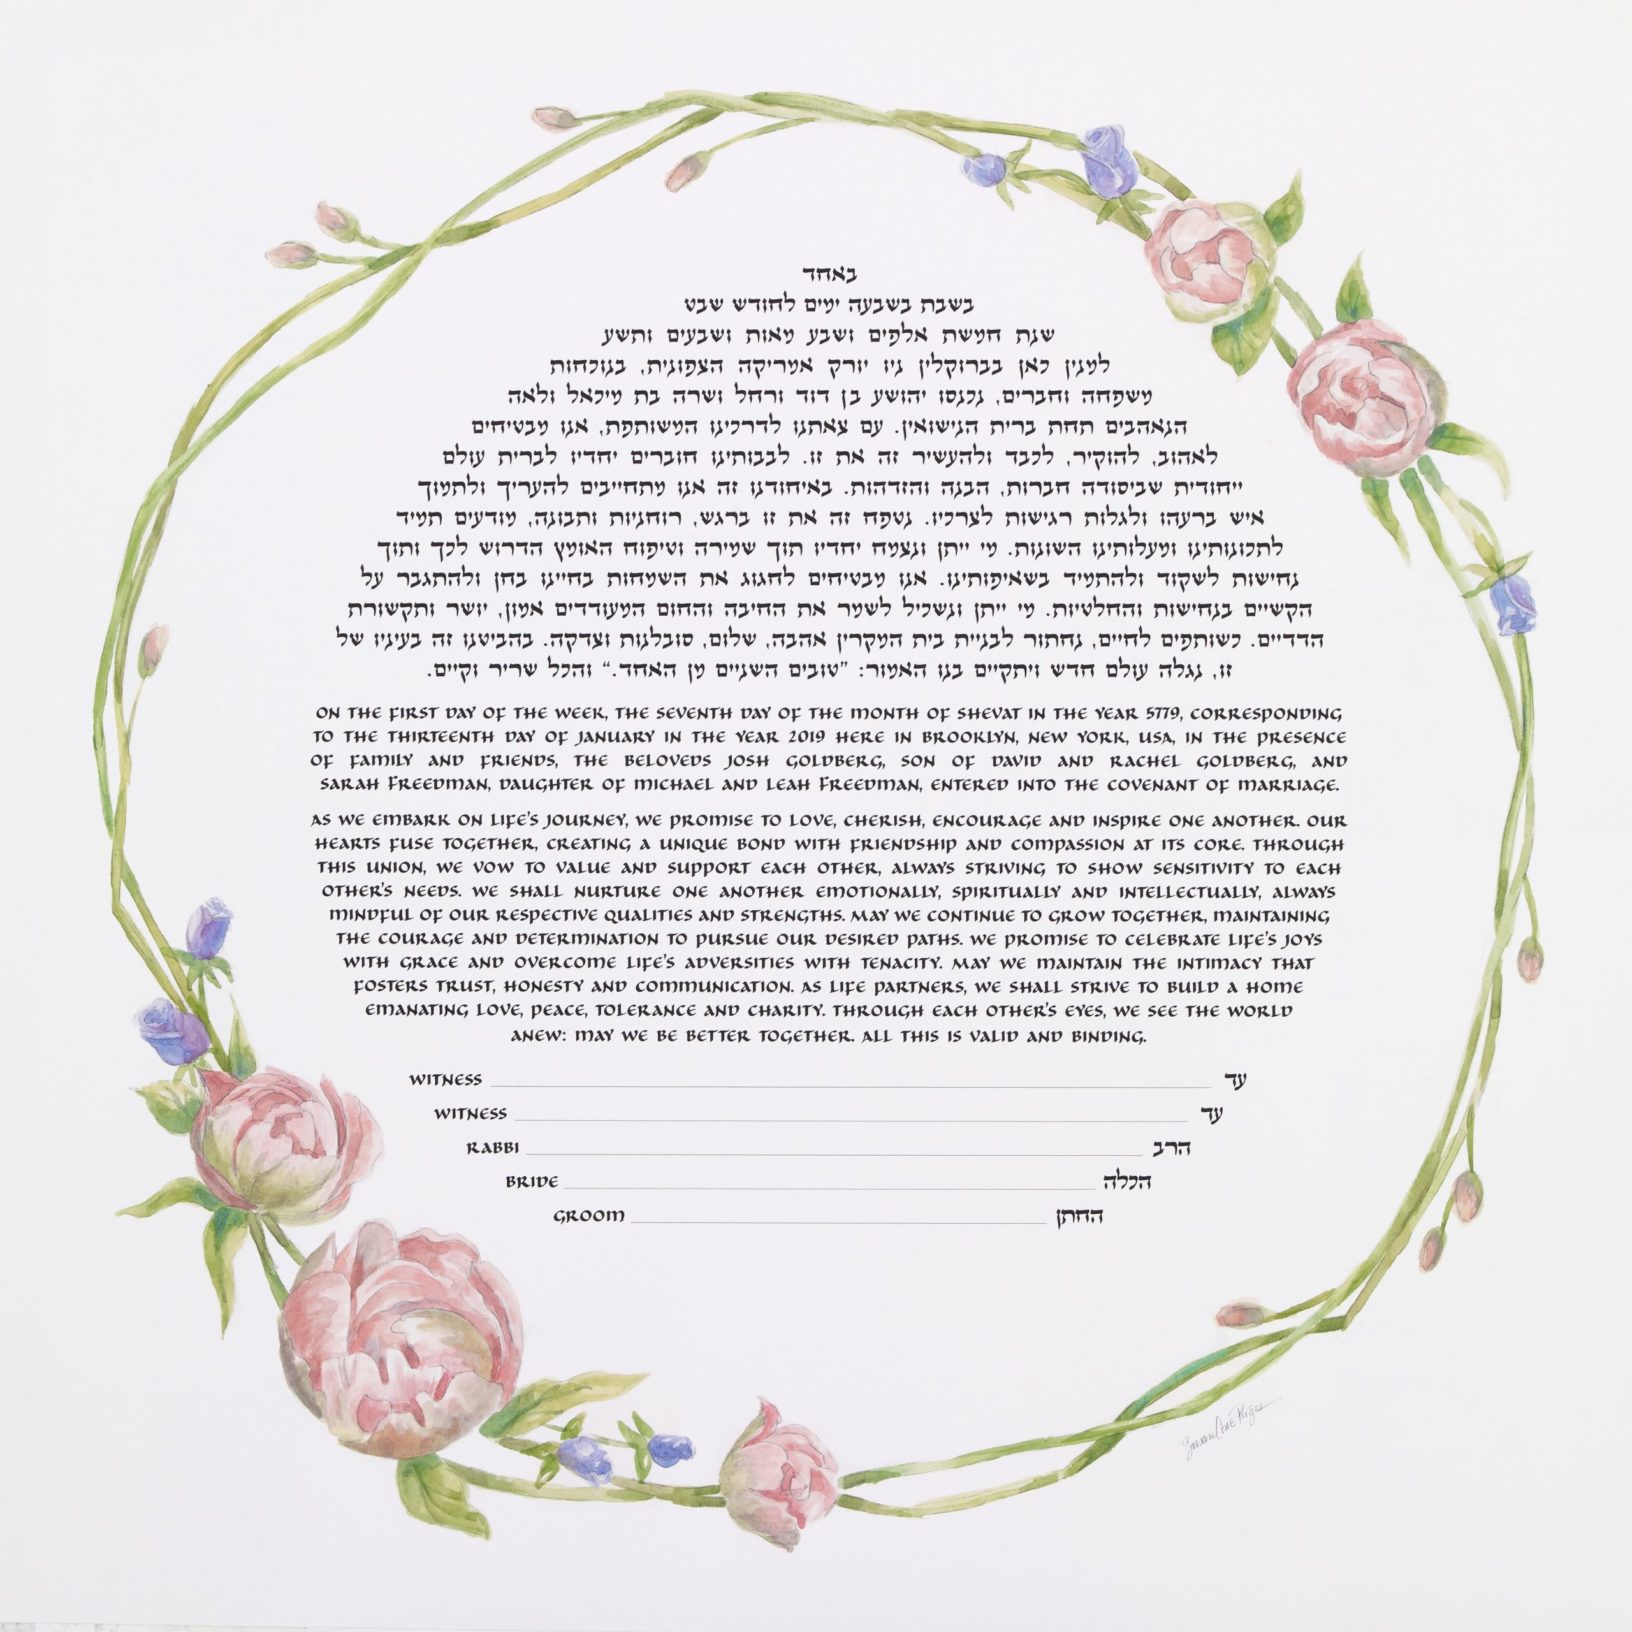 Circle of Vines with Peonies and Roses Ketubah Marriage Contracts by Susan Cone Porges